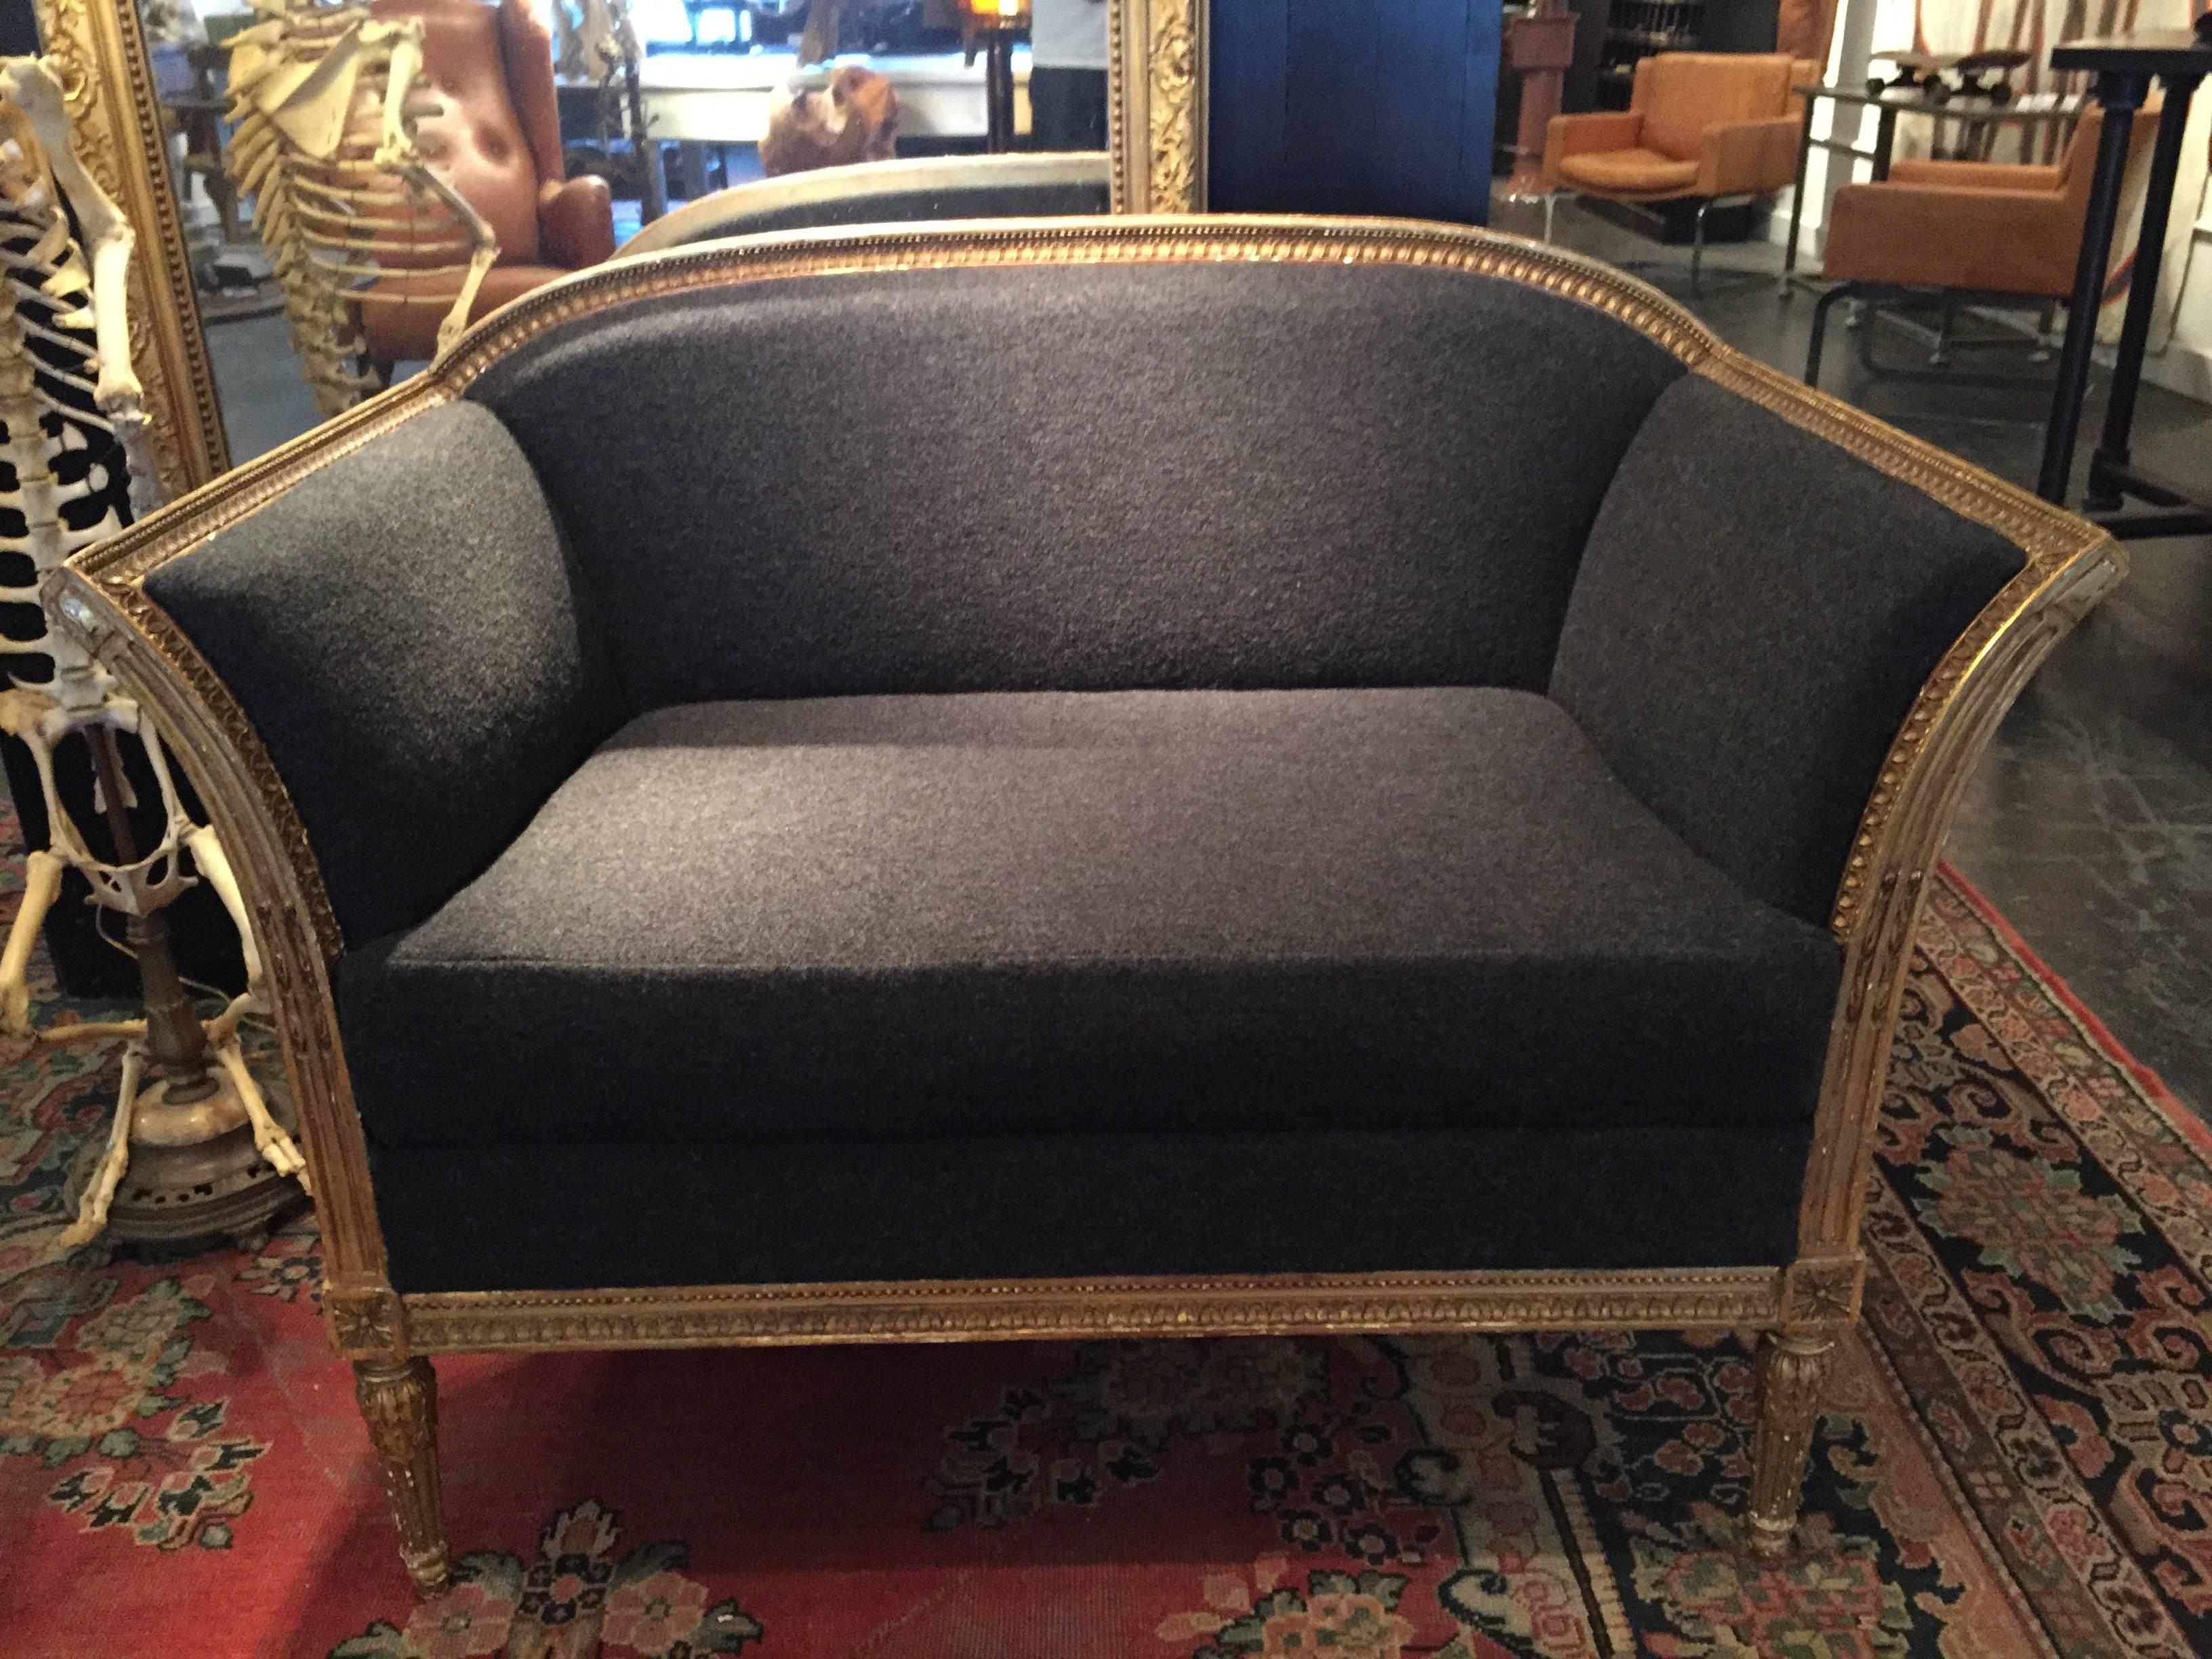 19th century French gilded settee fully restored and upholstered in Holland and Sherry boiled wool.